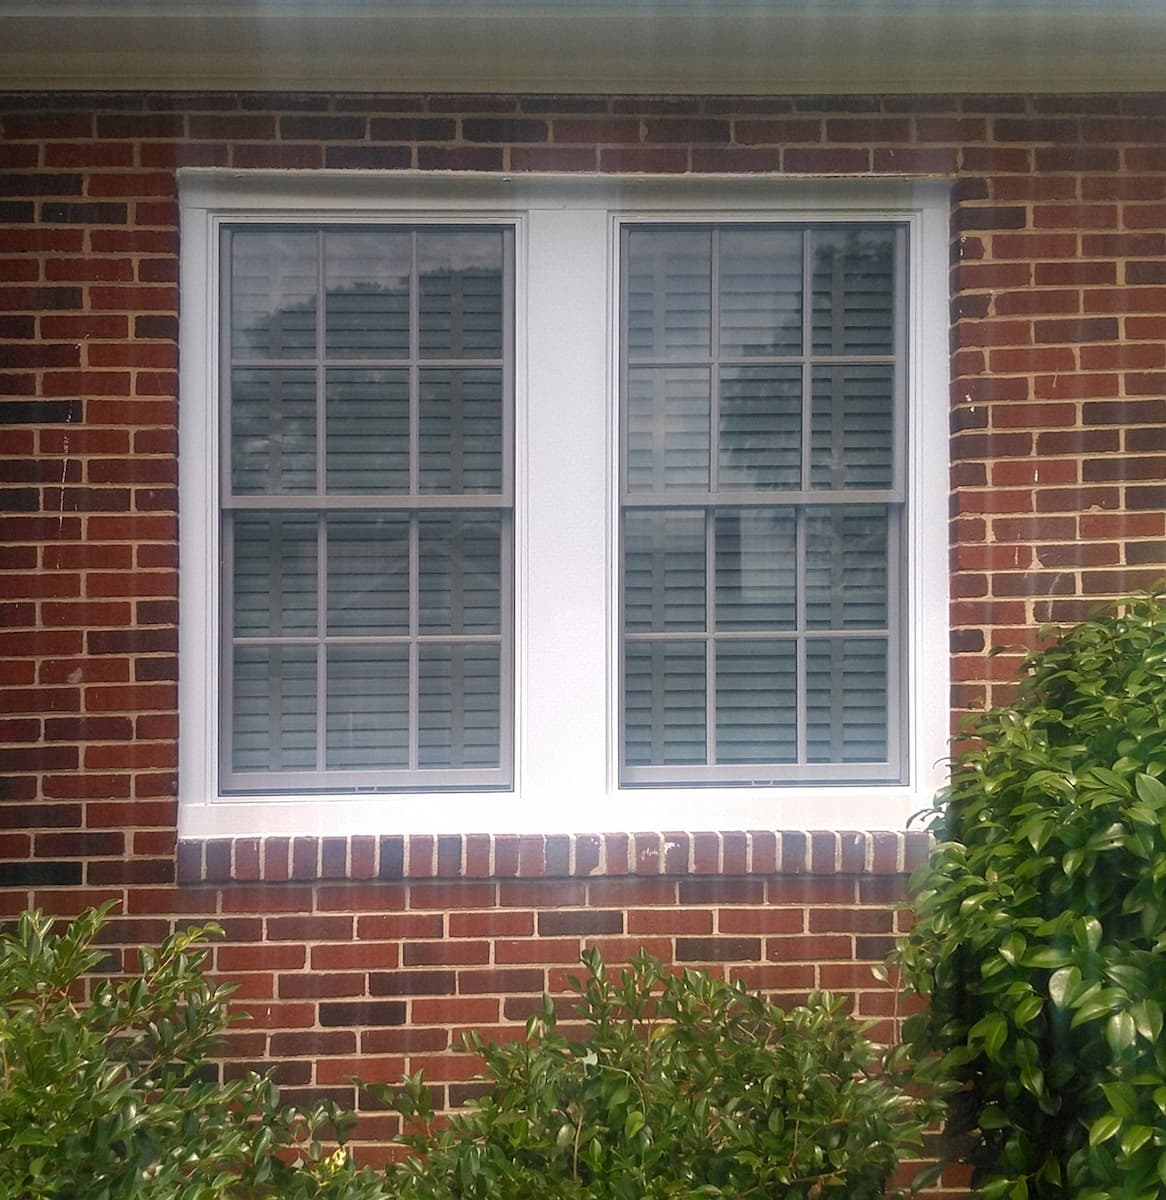 Exterior view of white wood windows with traditional grilles on a red brick home